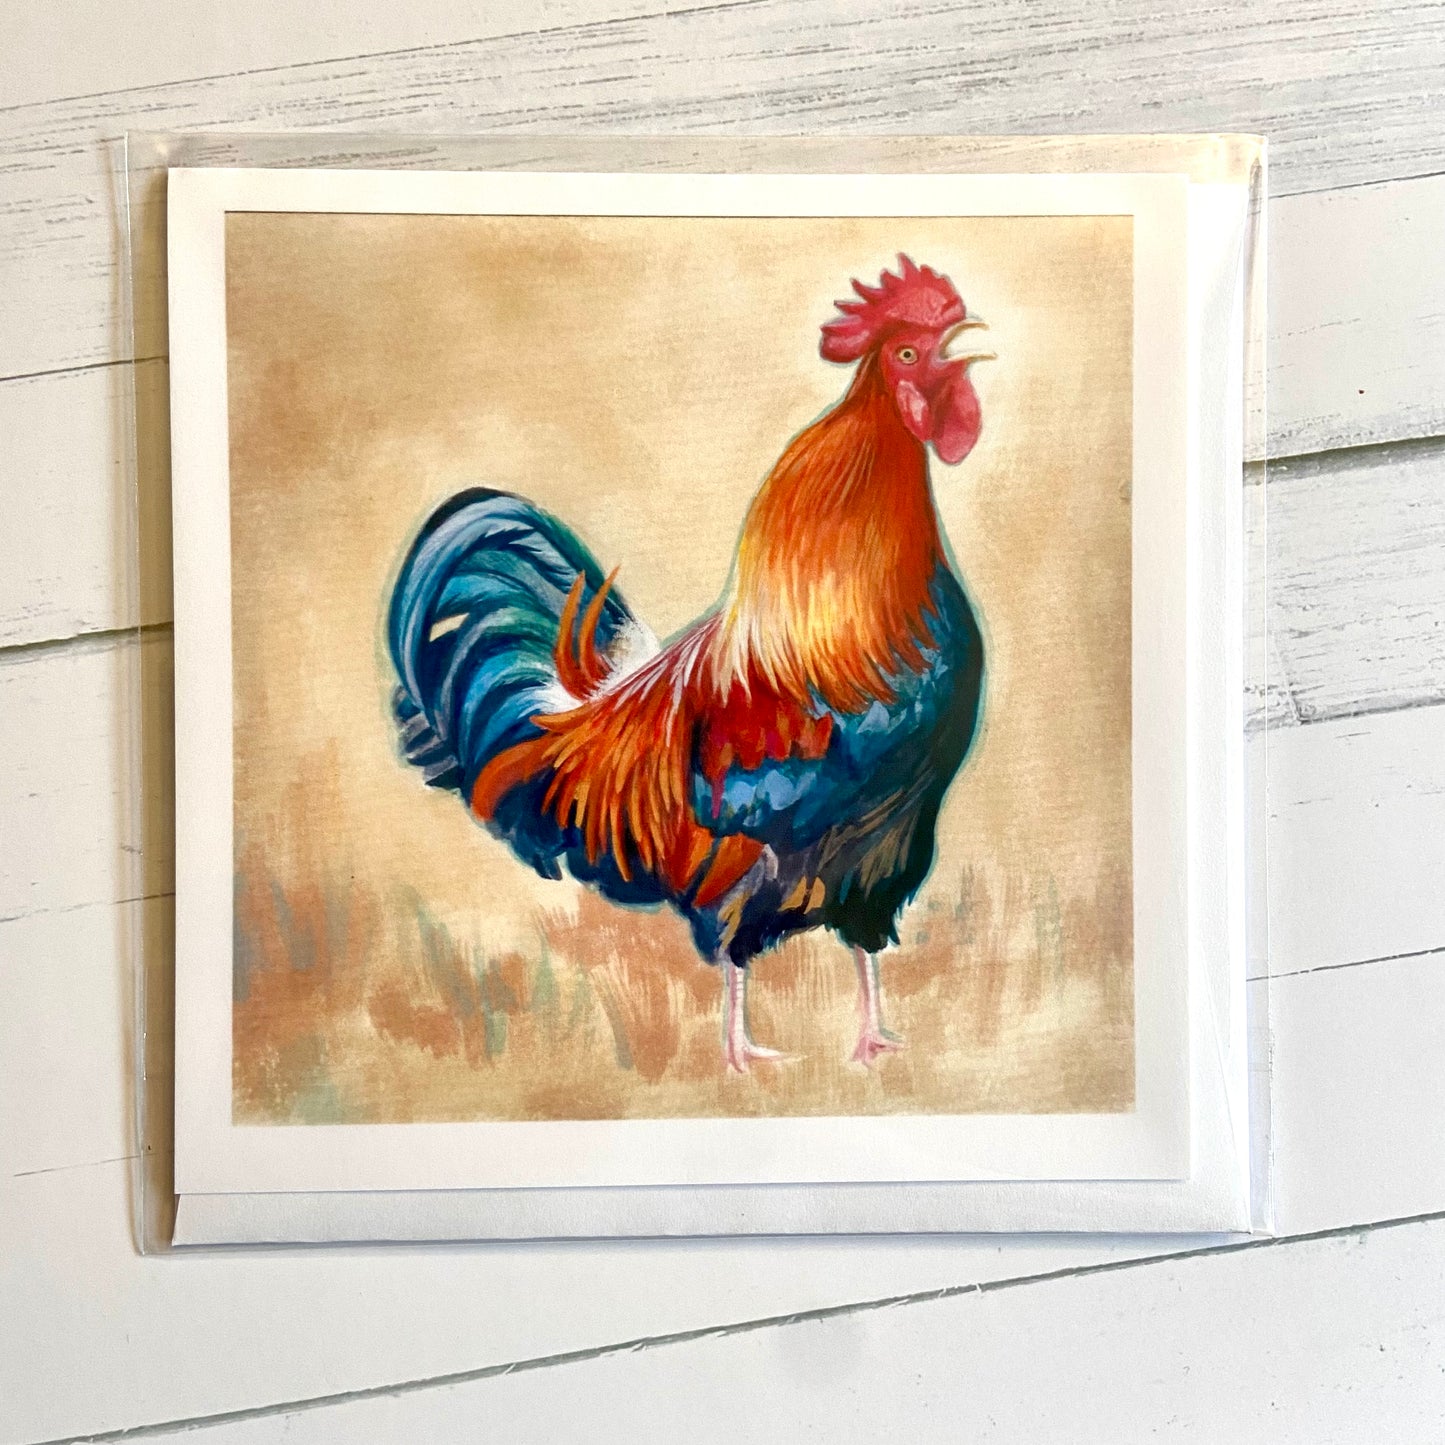 A square, folded white greeting card depicting my gouache painting of a rooster mid-caw. An orange and blue rooster stands in the center of the image, calling out with a blank stare in its eye. The background is beige and abstract.